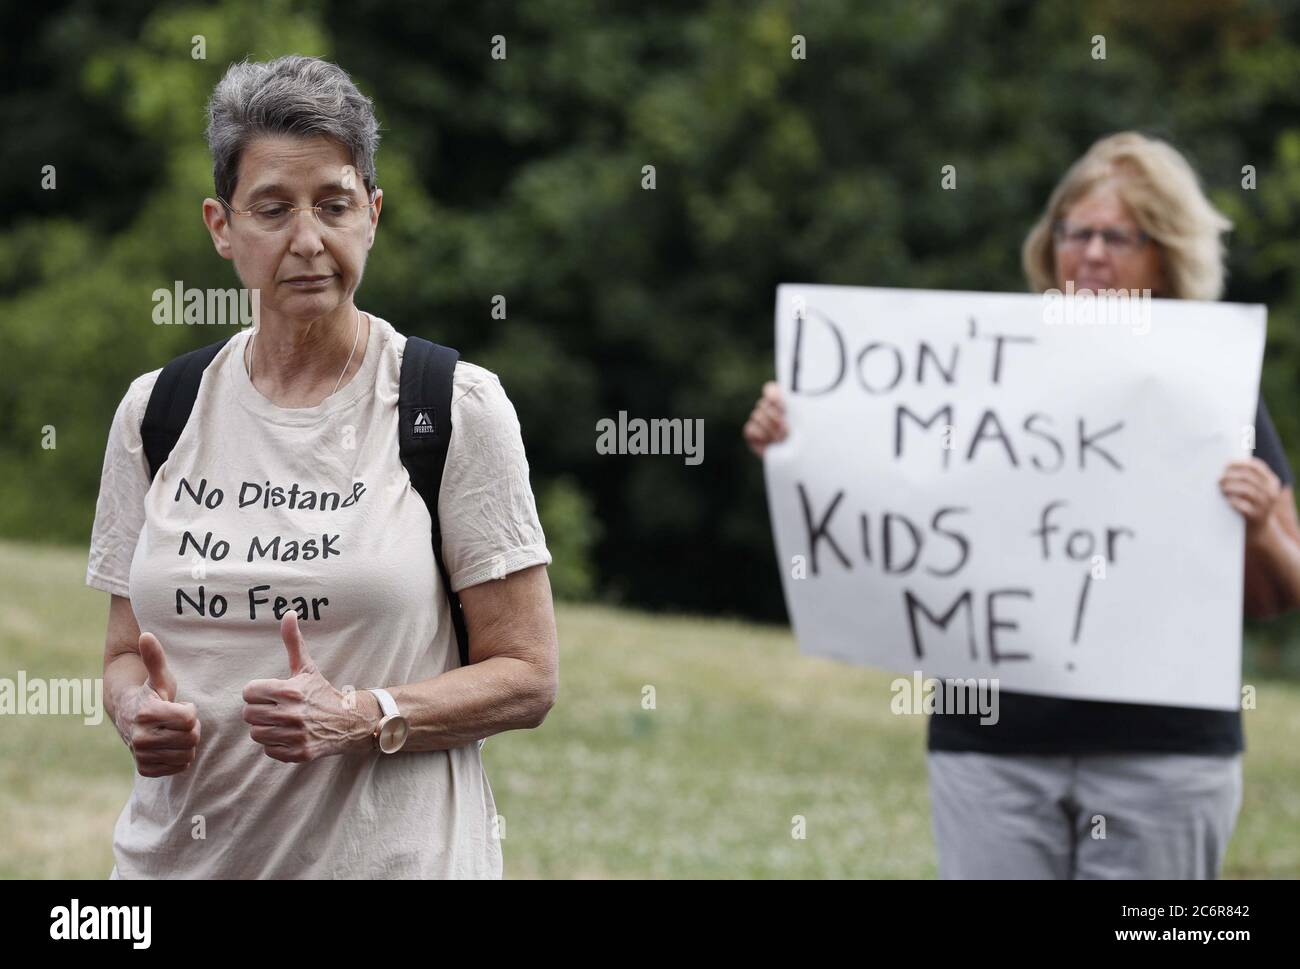 Cleveland, United States. 11th July, 2020. Janet Levitan, a local Physician, gives the thumbs up after giving an interview during a protest against Ohio's face covering order in the wake of the Coronavirus (COVID-19) at Edgewater Park in Cleveland, Ohio on Saturday, July 11, 2020. Photo by Aaron Josefczyk/UPI Credit: UPI/Alamy Live News Stock Photo